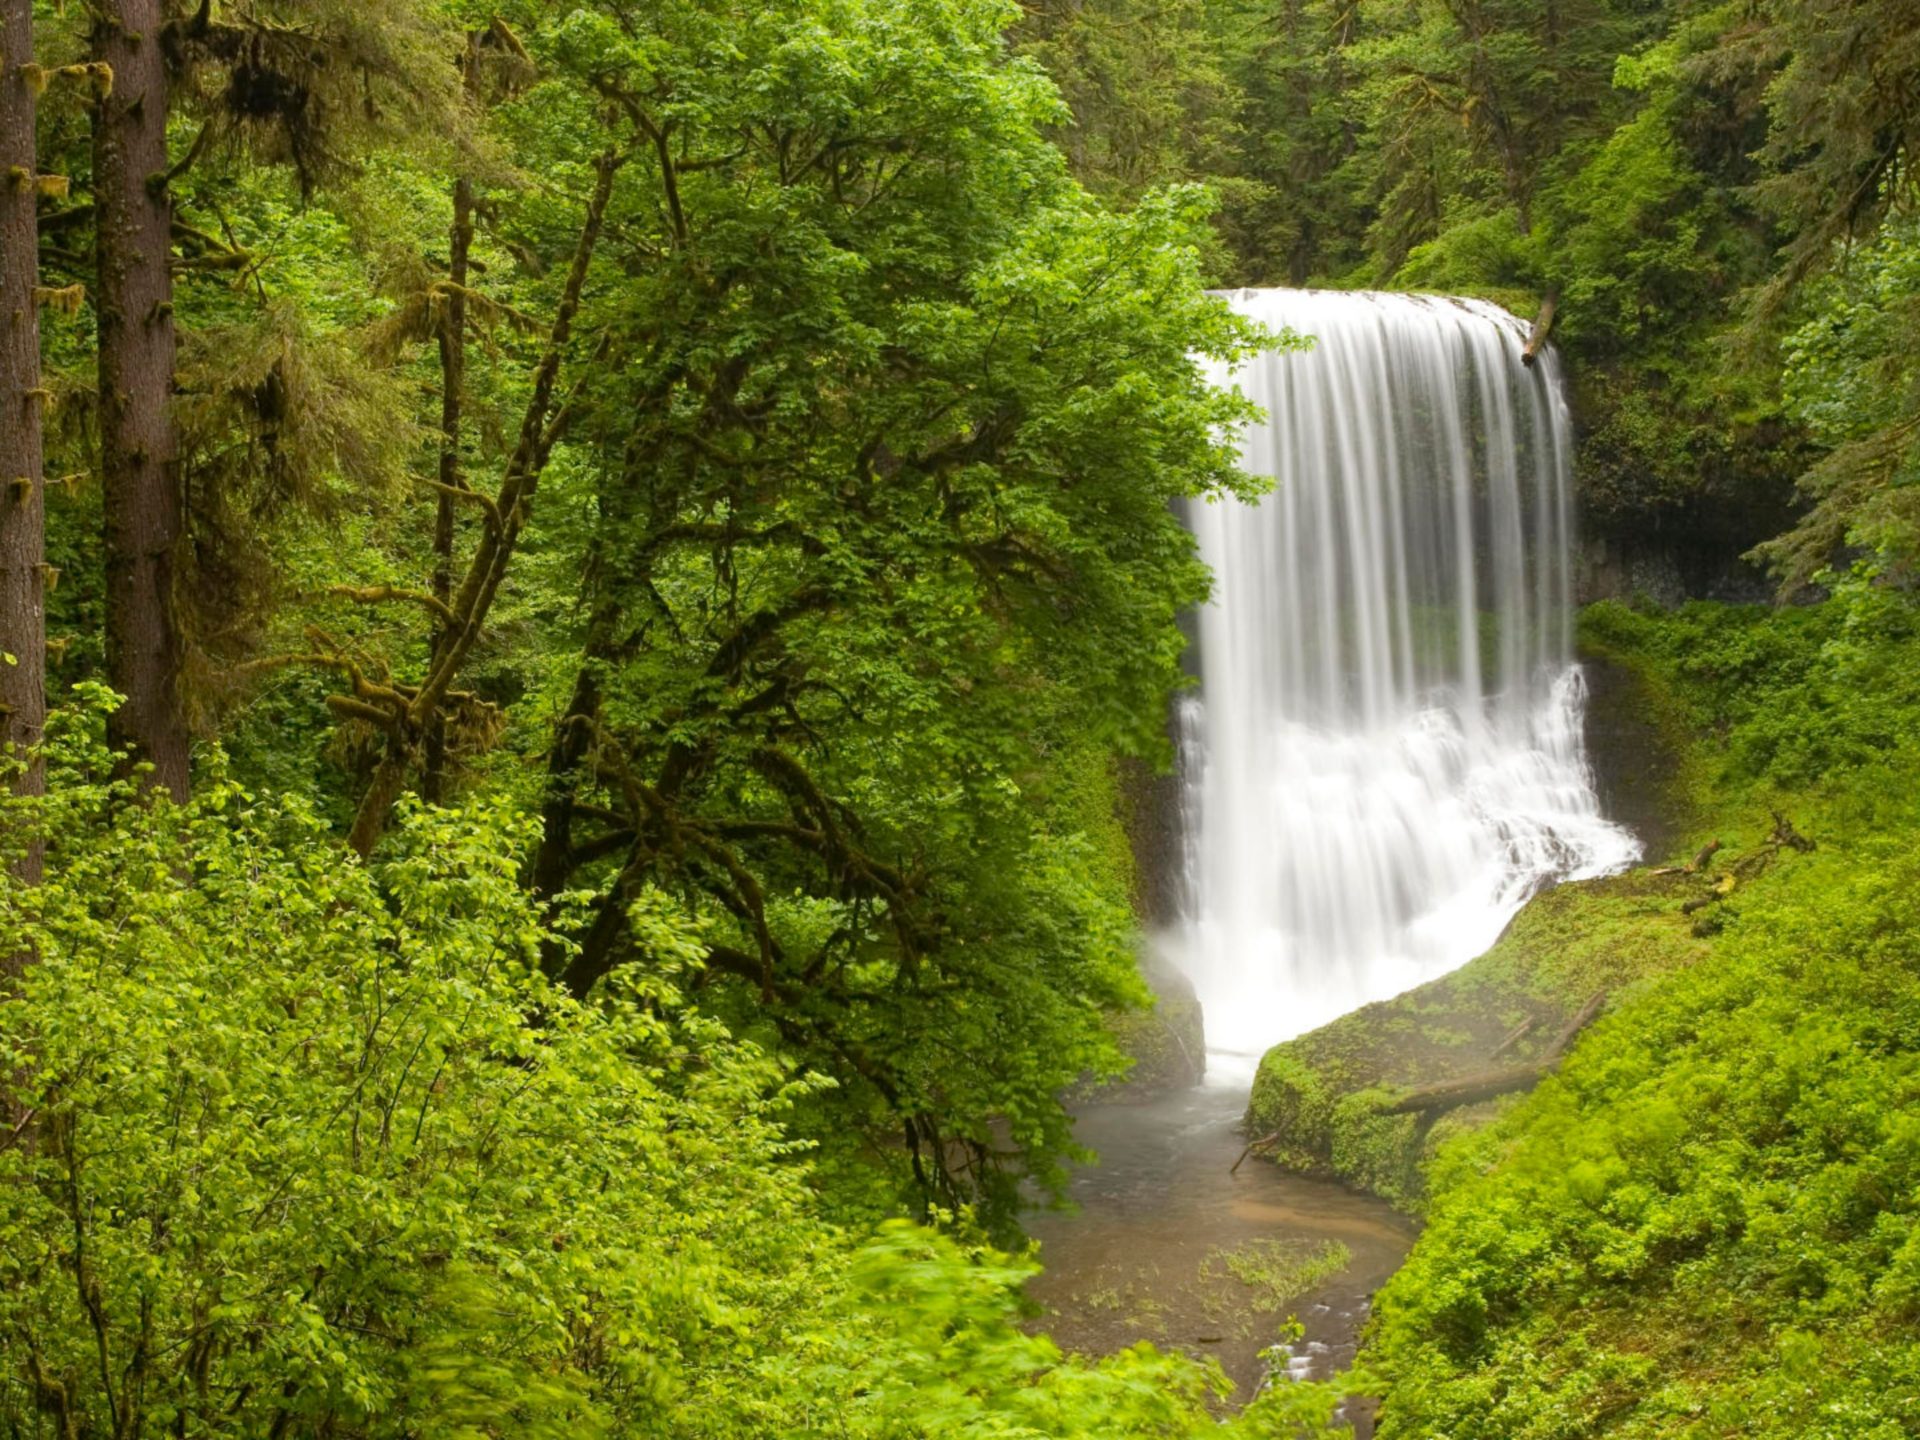 Spring Landscape Nature Waterfall Forest With Green Trees Oregon State Usa Spring 4k Wallpaper 3840x2160, Wallpaper13.com